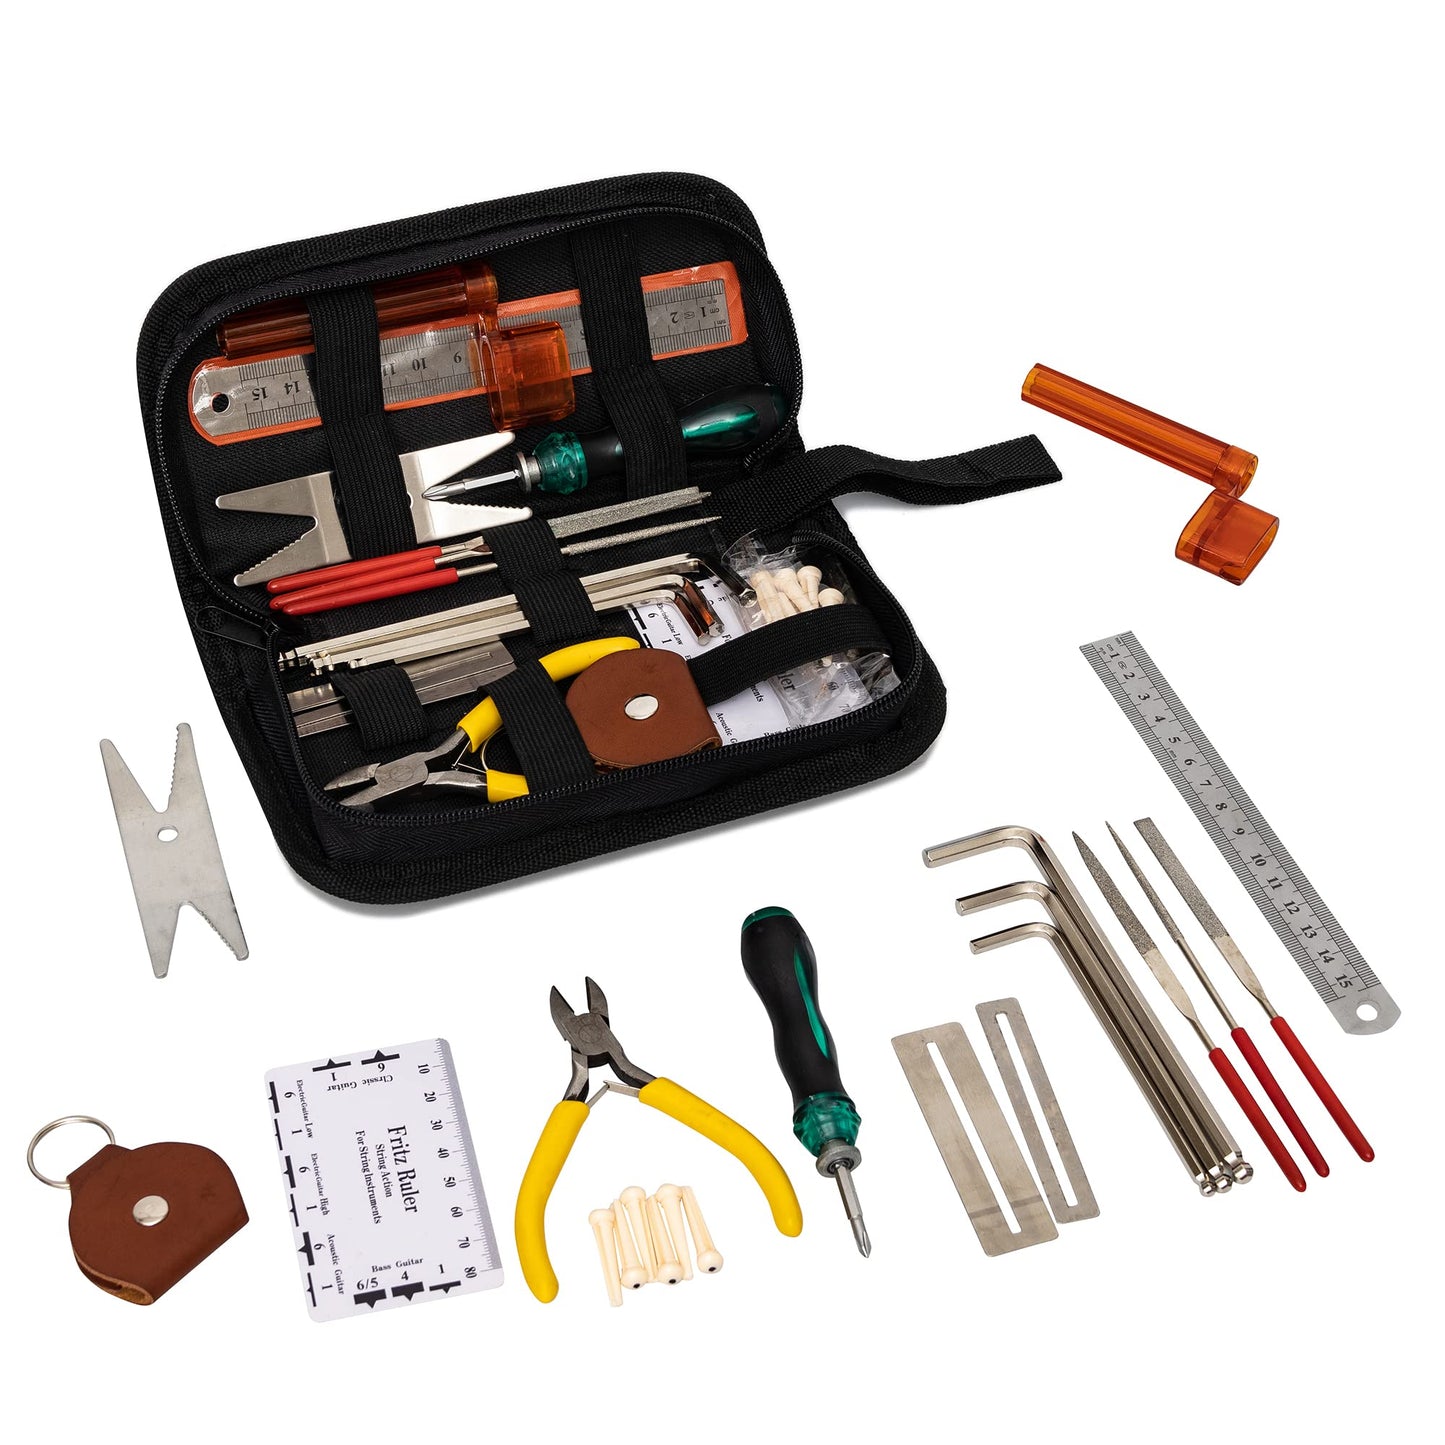 GOCOHHI Guitar Repairing Tool Kit Wire Plier,String Organizer,Fingerboard Protector,Hex Wrenches, Files, String Ruler Action Ruler, Spanner